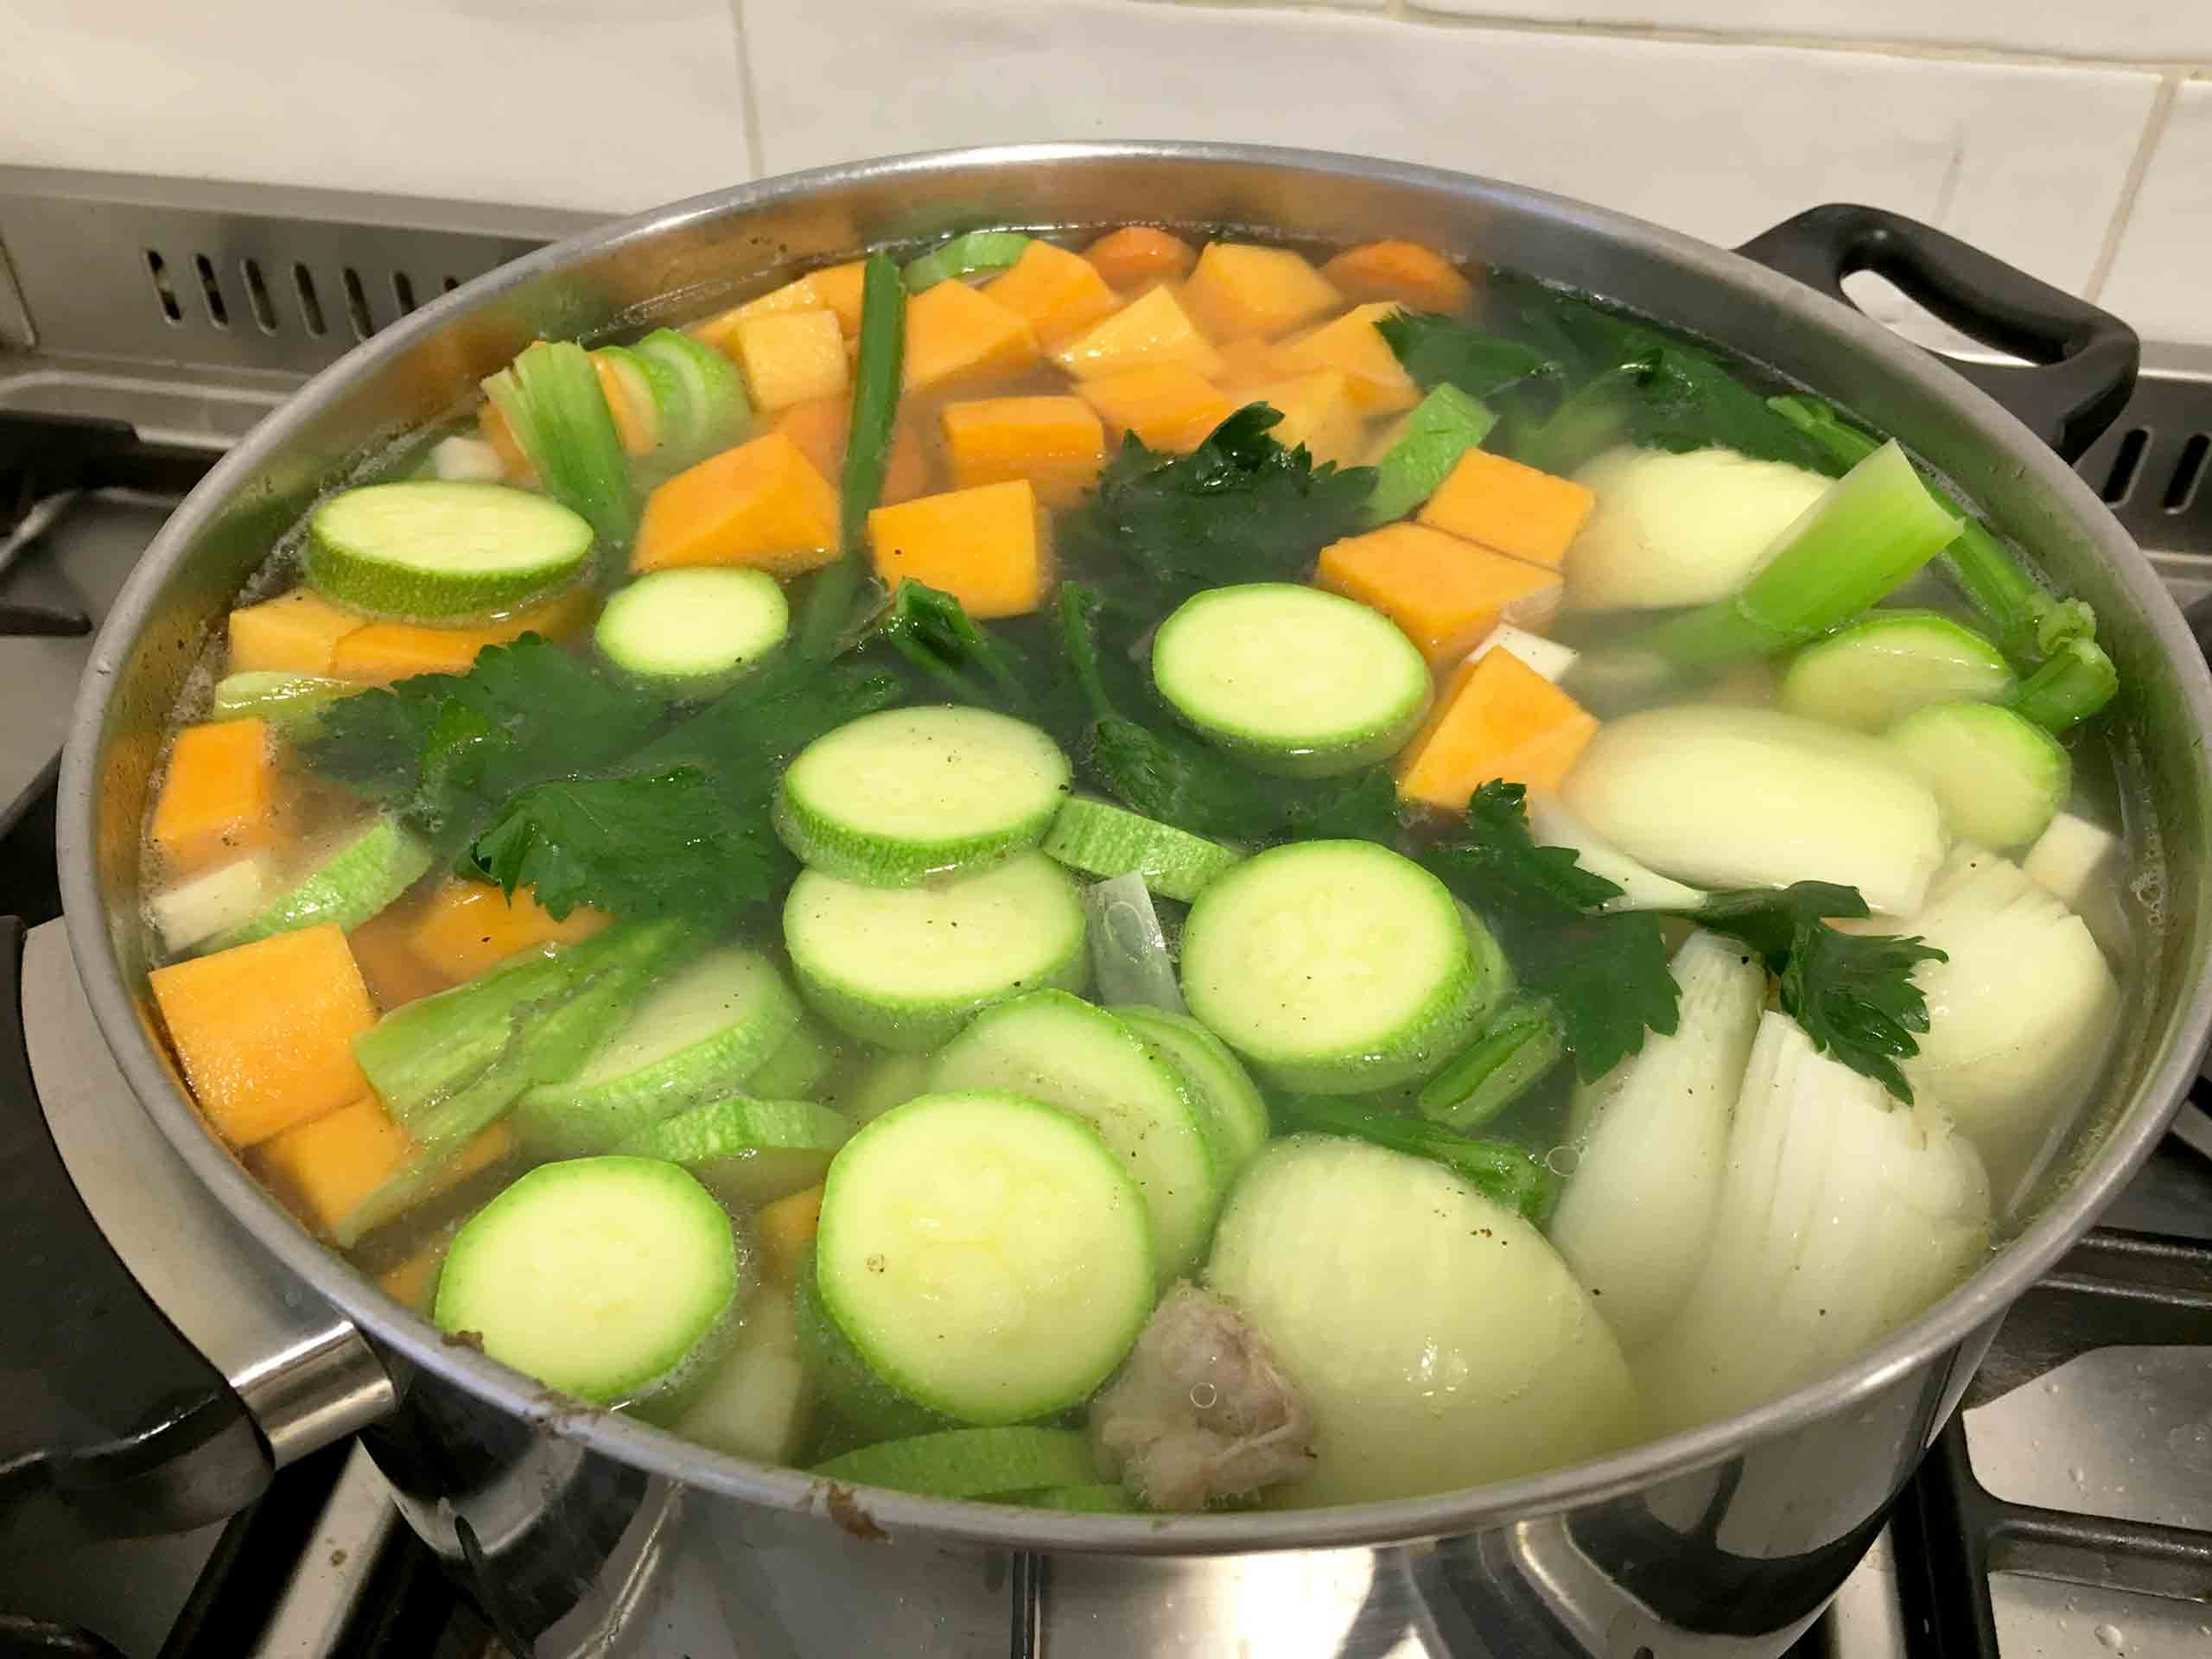 Adding the vegetables to the chicken soup